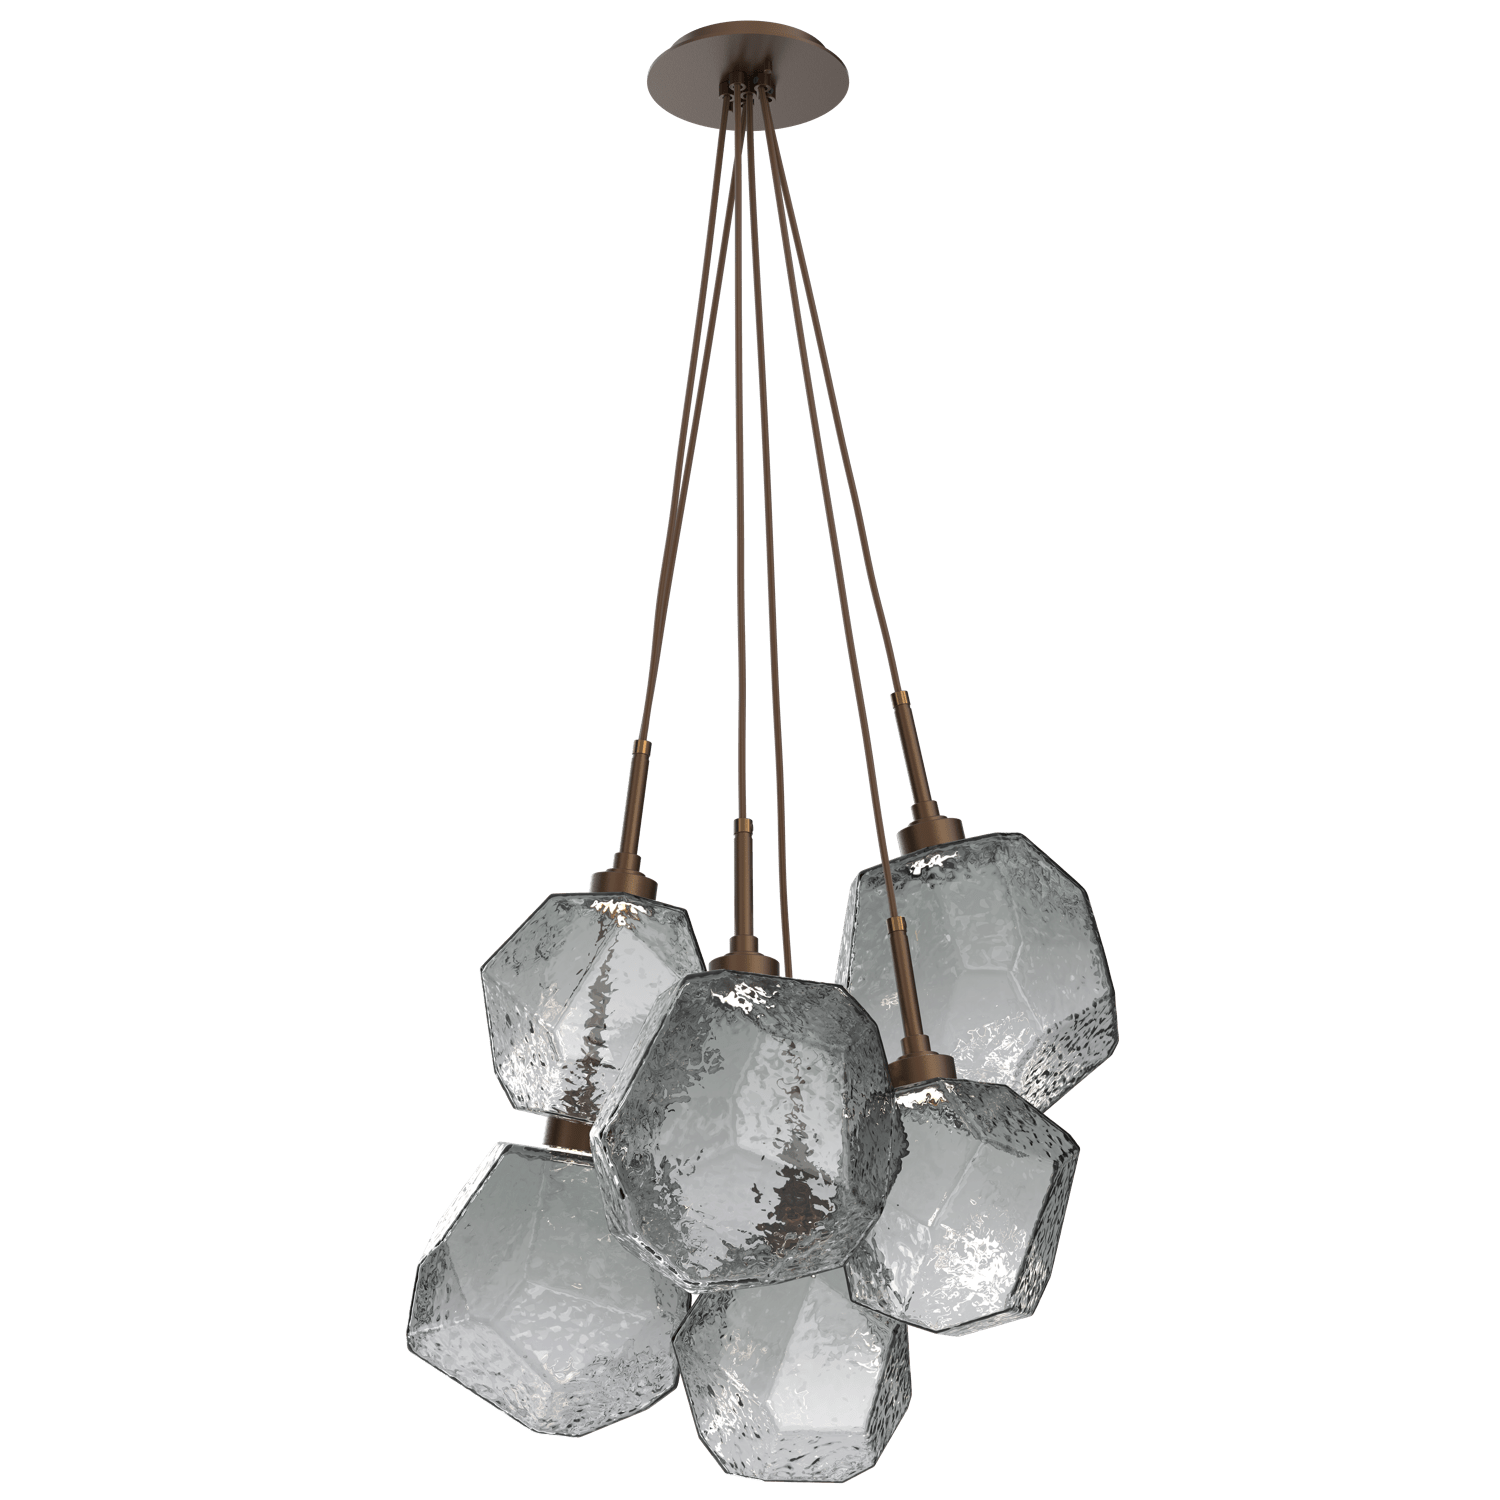 CHB0039-0F-FB-S-Hammerton-Studio-Gem-6-light-cluster-pendant-light-with-flat-bronze-finish-and-smoke-blown-glass-shades-and-LED-lamping